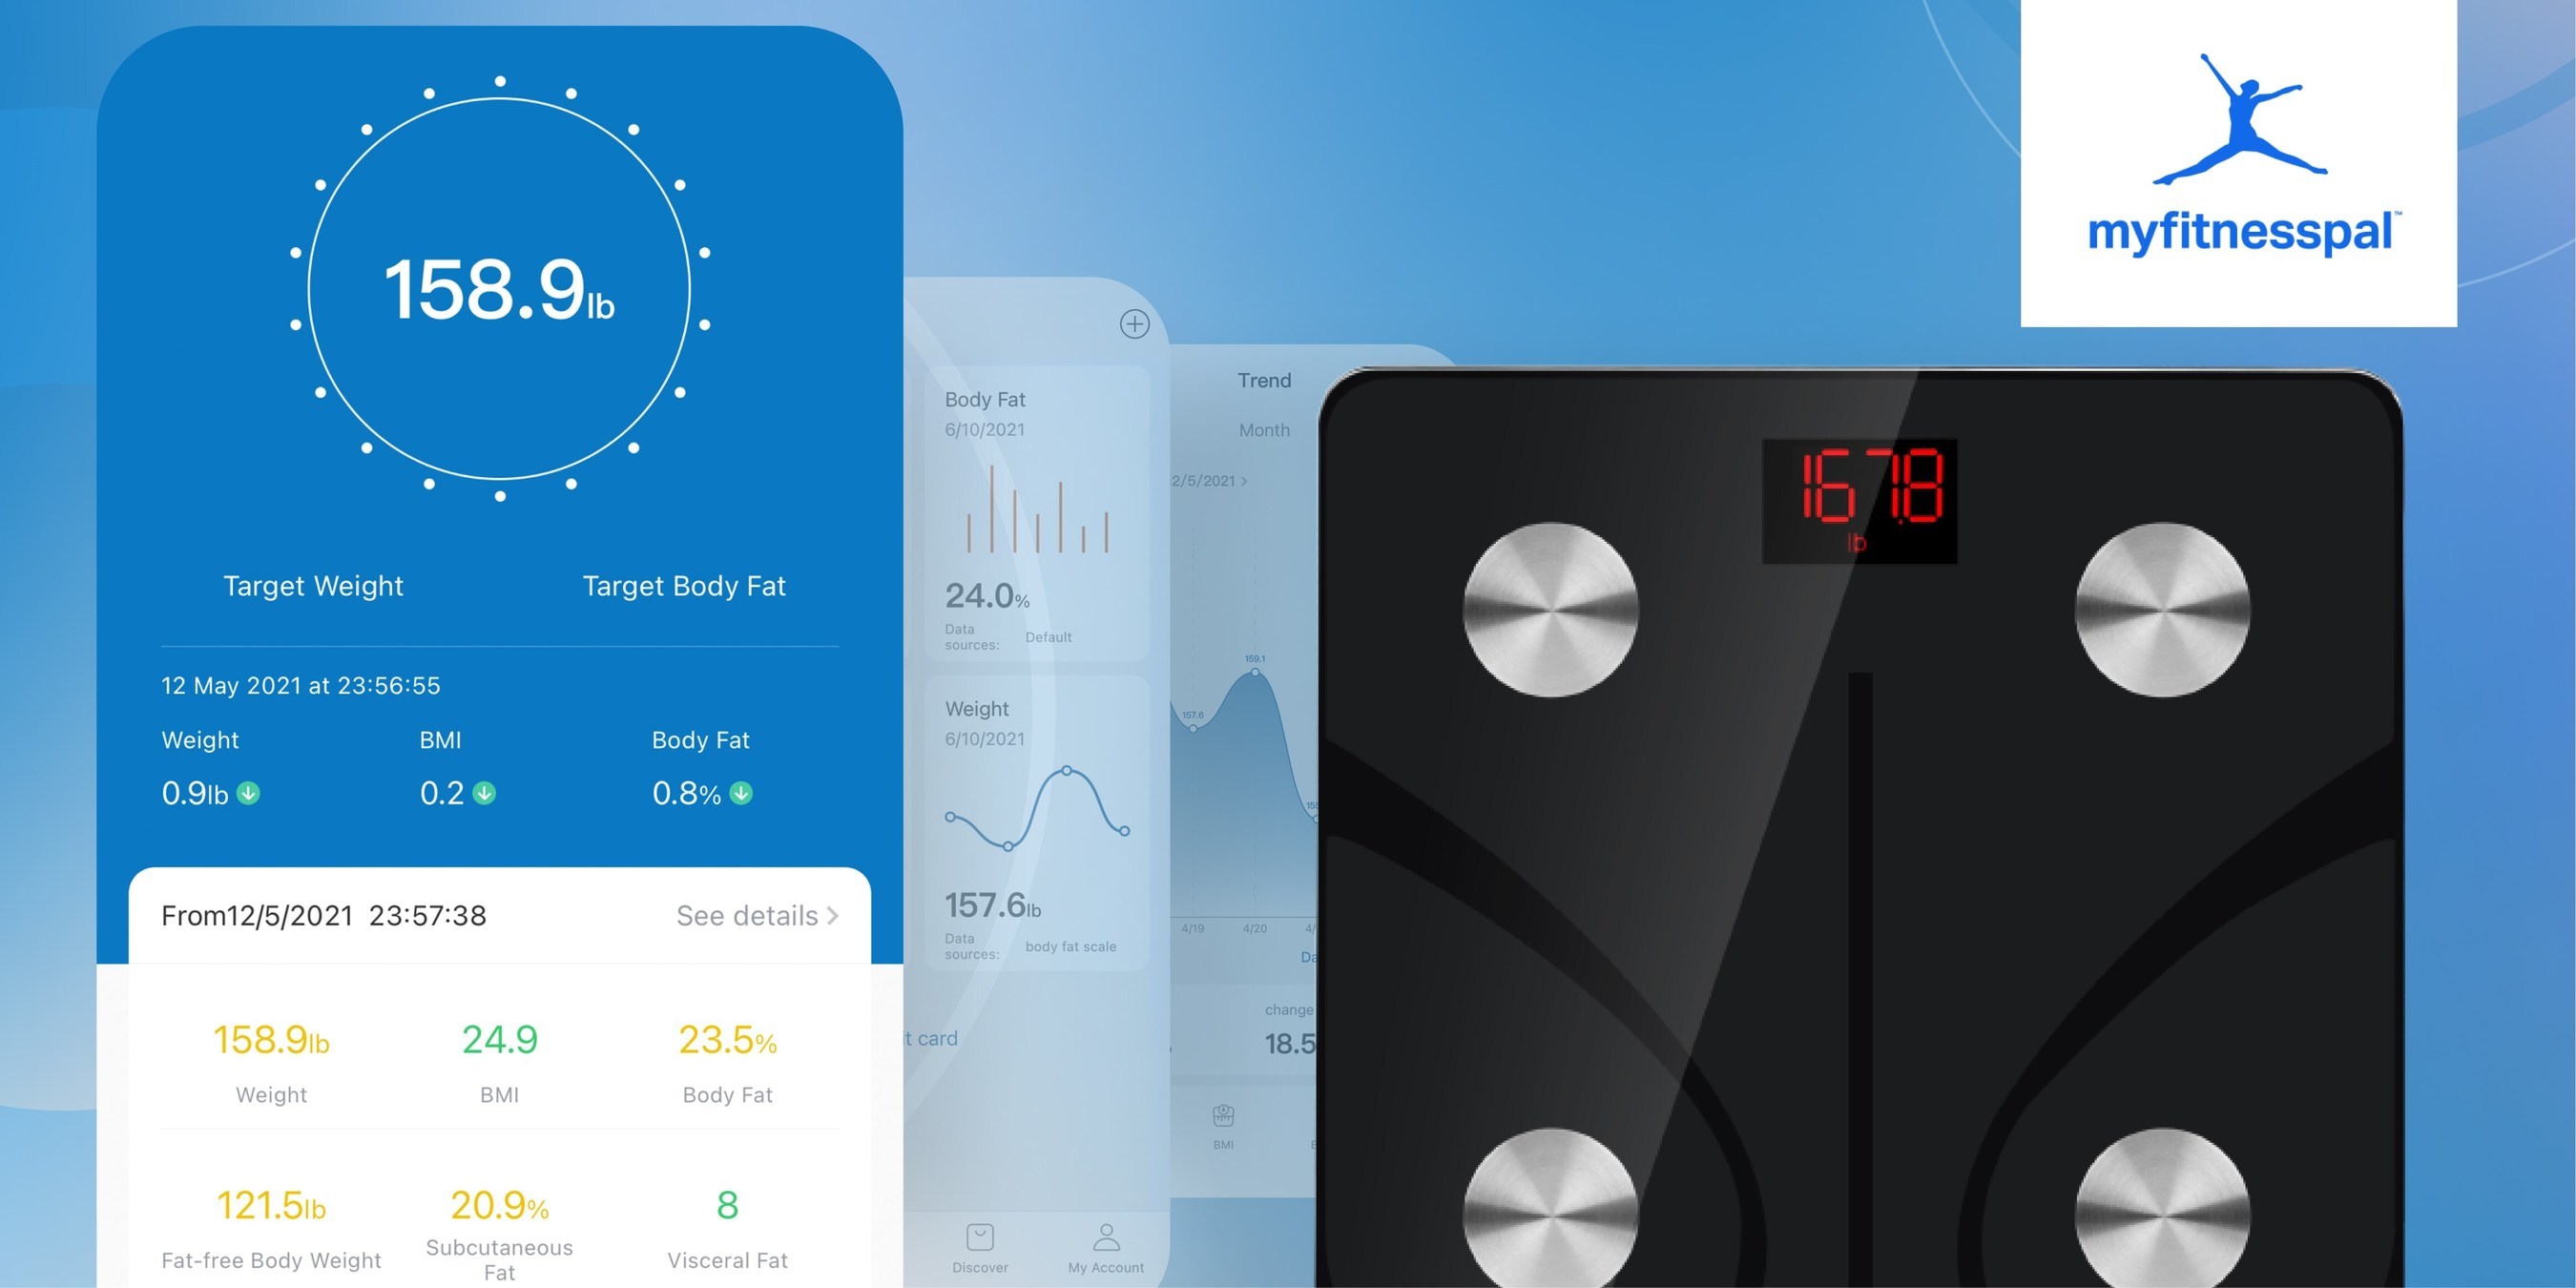 How Does The RENPHO Smart Scale Work? How Are They Different From